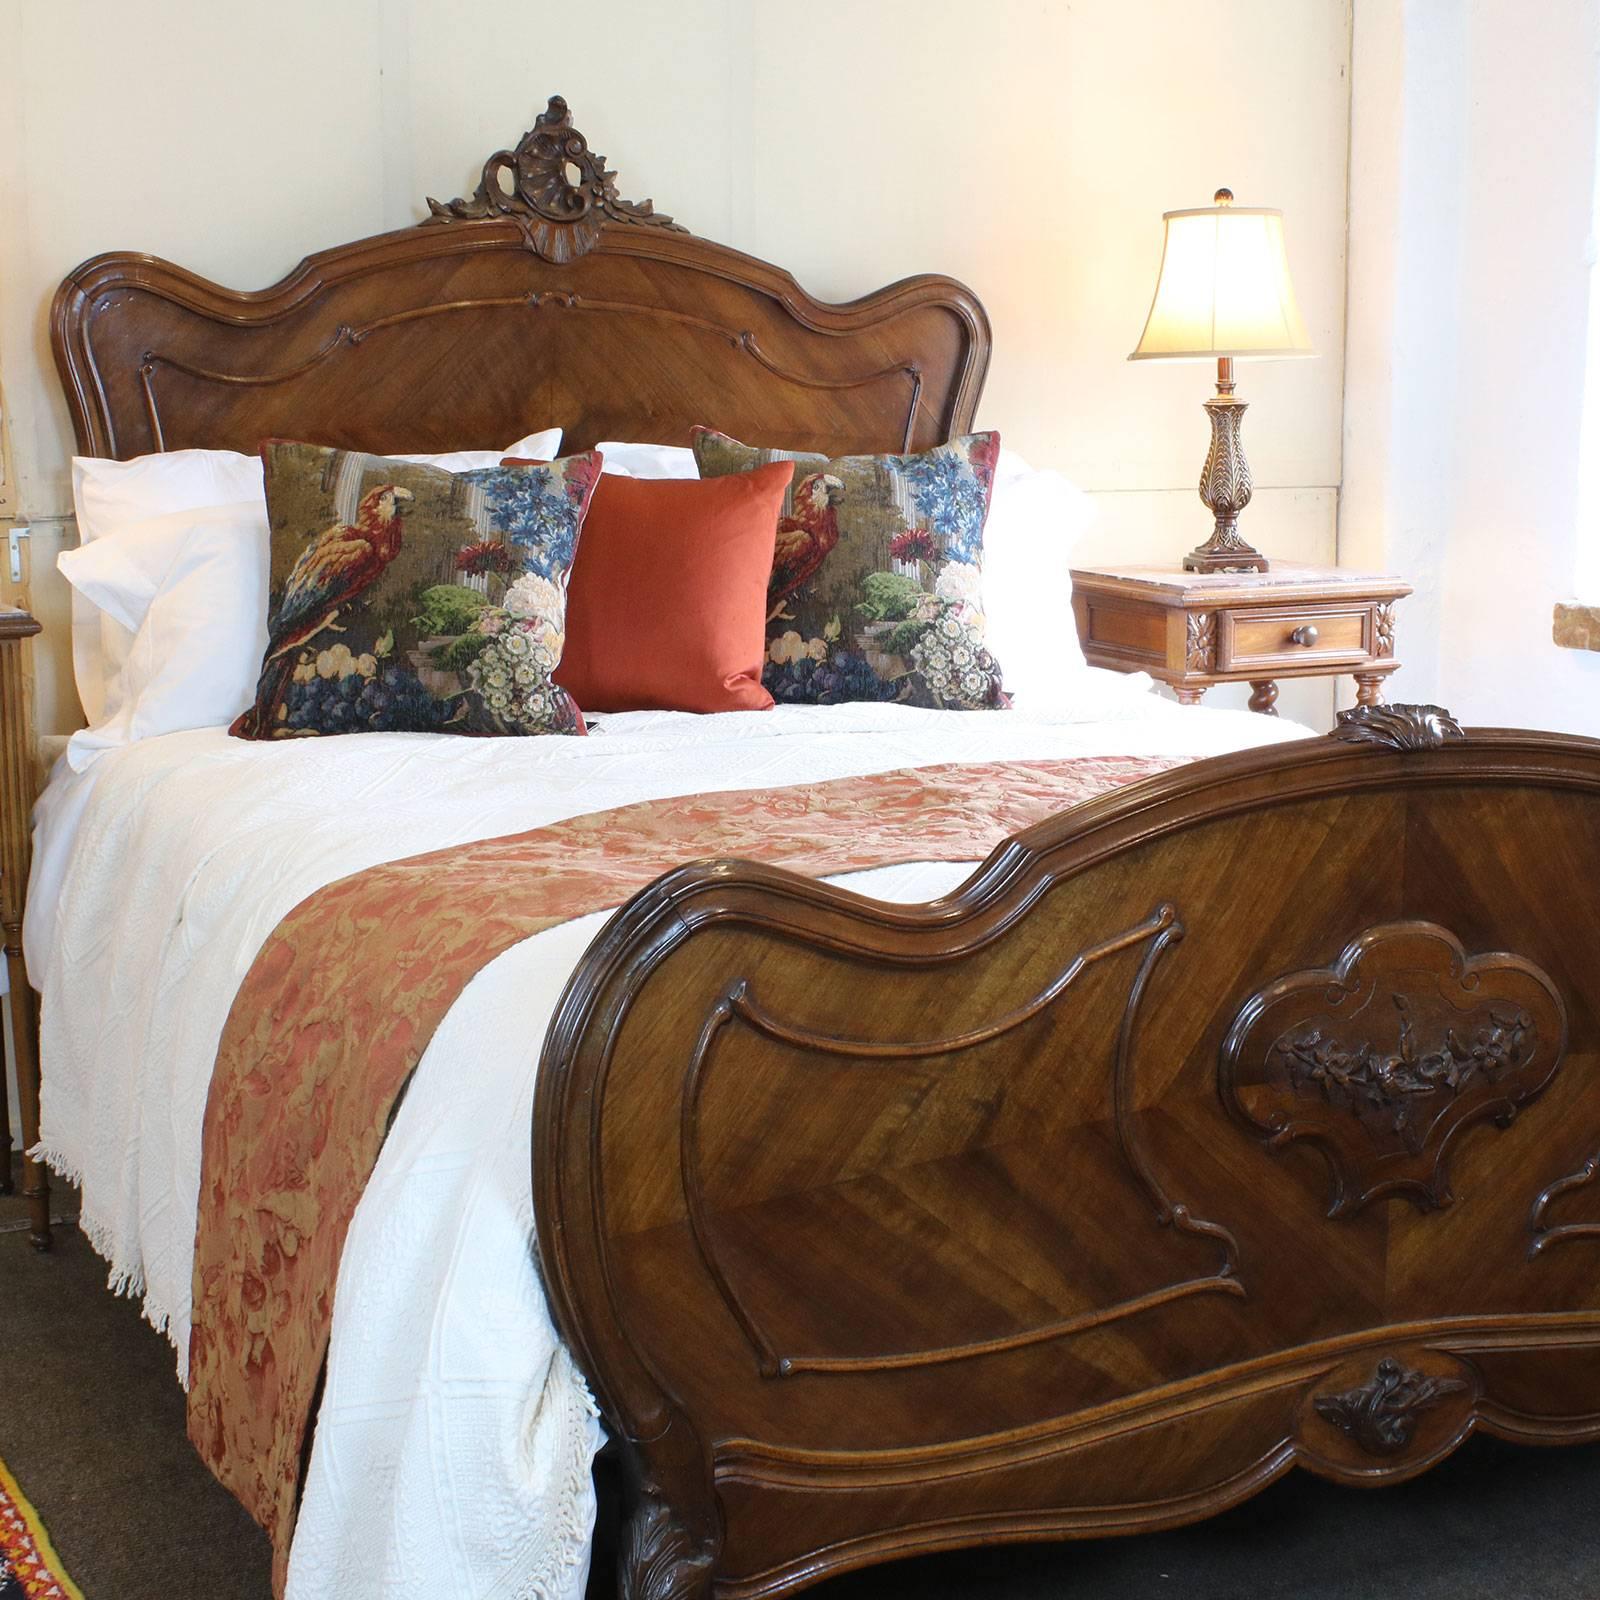 A French Louis XV style bed with ornate carving on the head panel and shaped head and foot boards.
This bed accepts a British king-size or American queen-size (60 in wide) base and mattress set.
The price is for the bedstead alone.